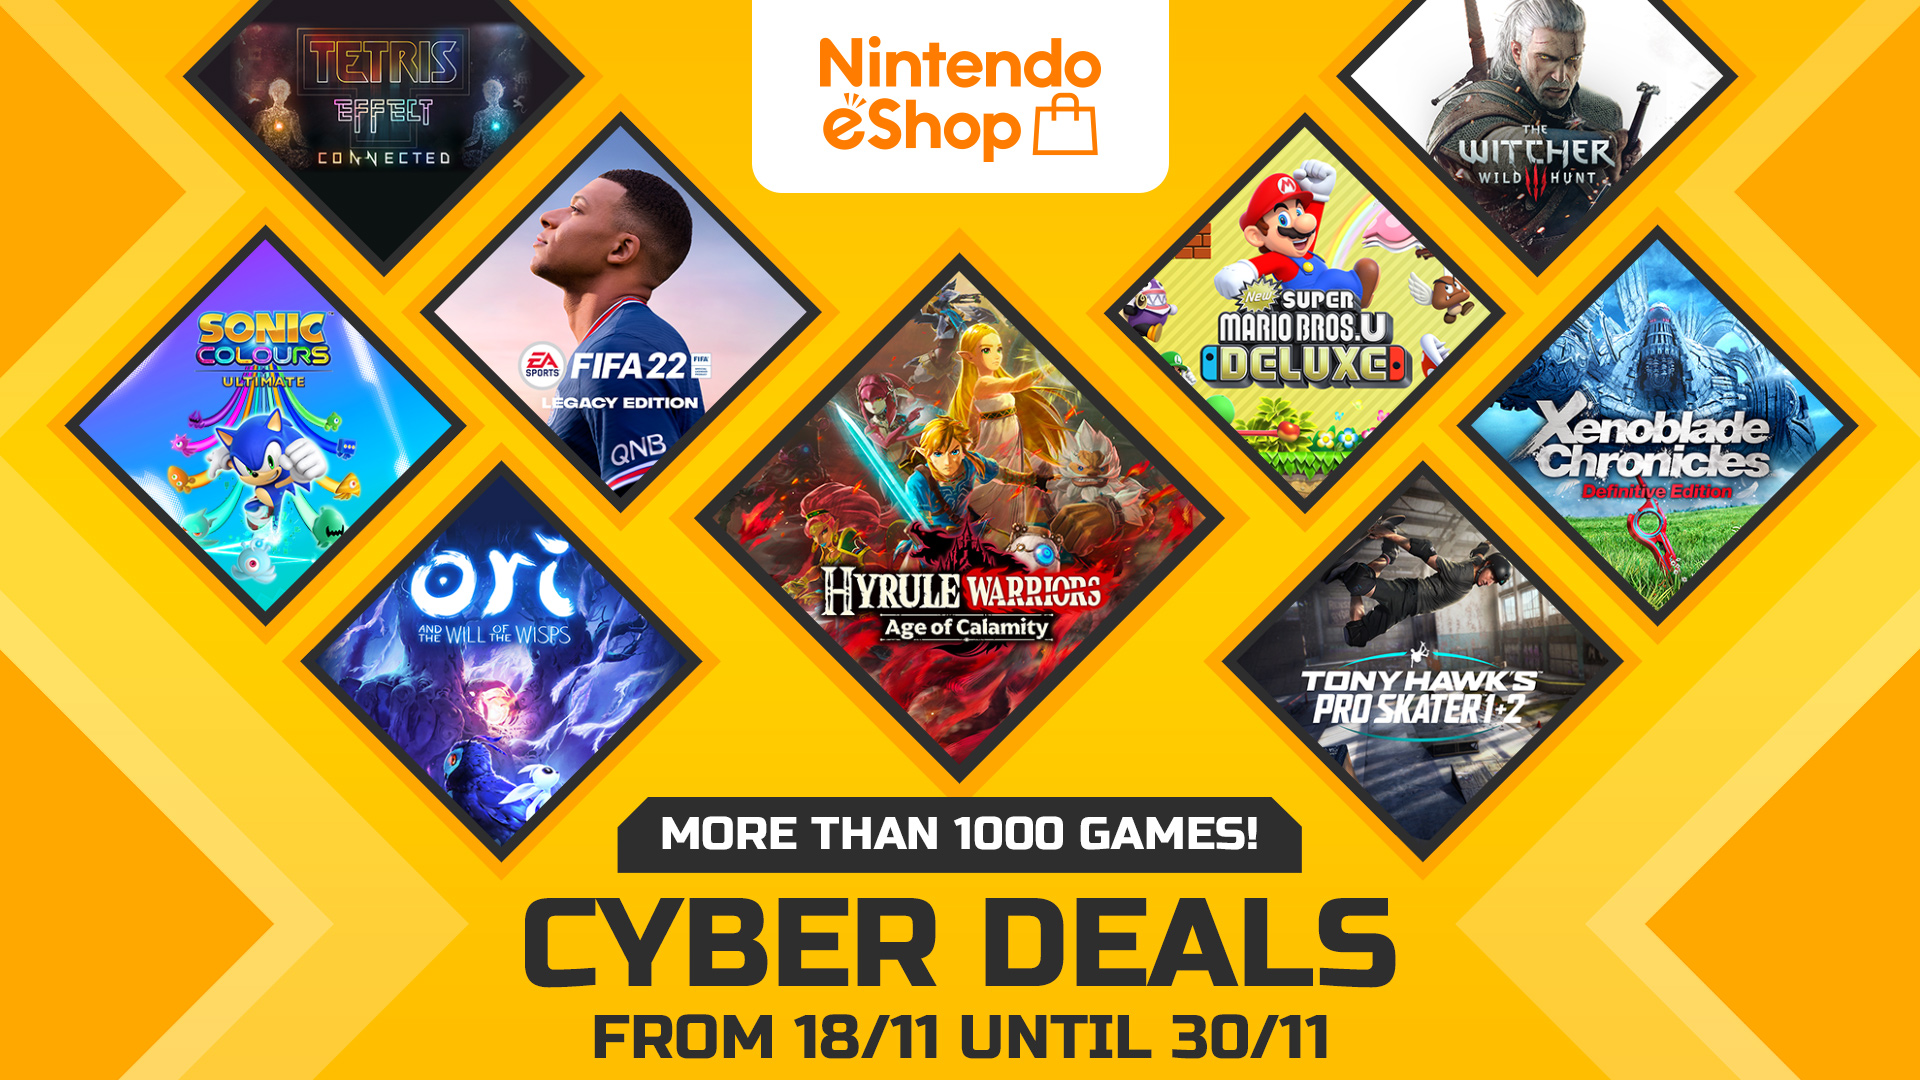 Nintendo of Europe on Twitter: "It's that time of year again! The Nintendo # eShop Cyber Deals sale kicks off on 18/11, featuring savings of up to 75%  off over 1000 #NintendoSwitch games!